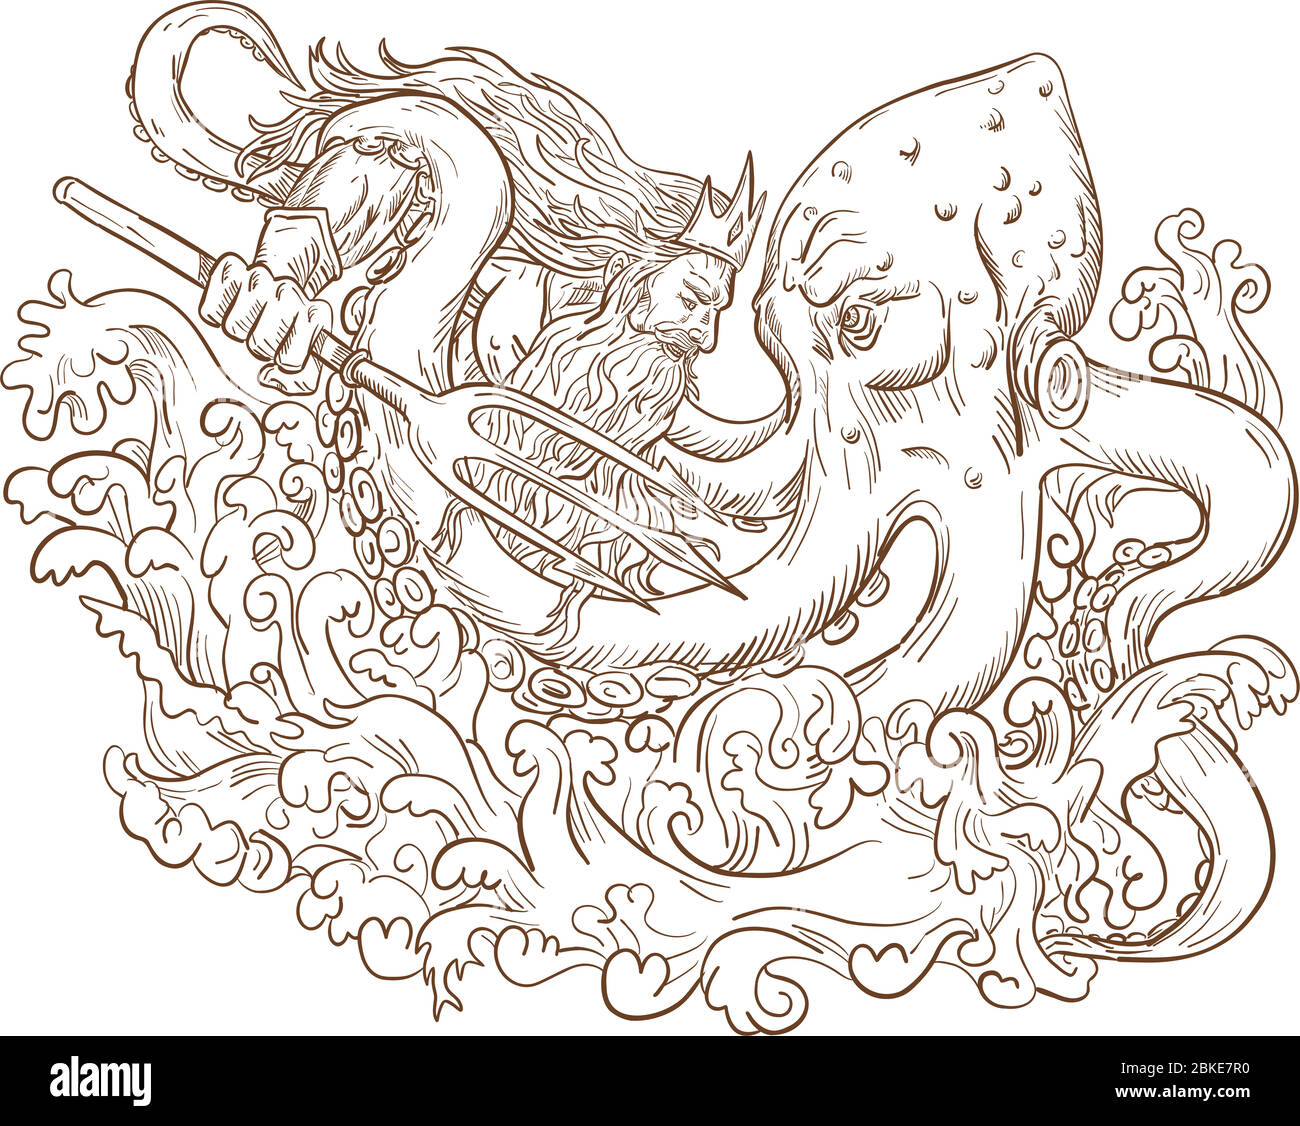 Drawing sketch style illustration of Roman god Neptune or Poseidon, Greek god of the sea, with trident and crown fighting a Kraken, giant octopus on i Stock Vector